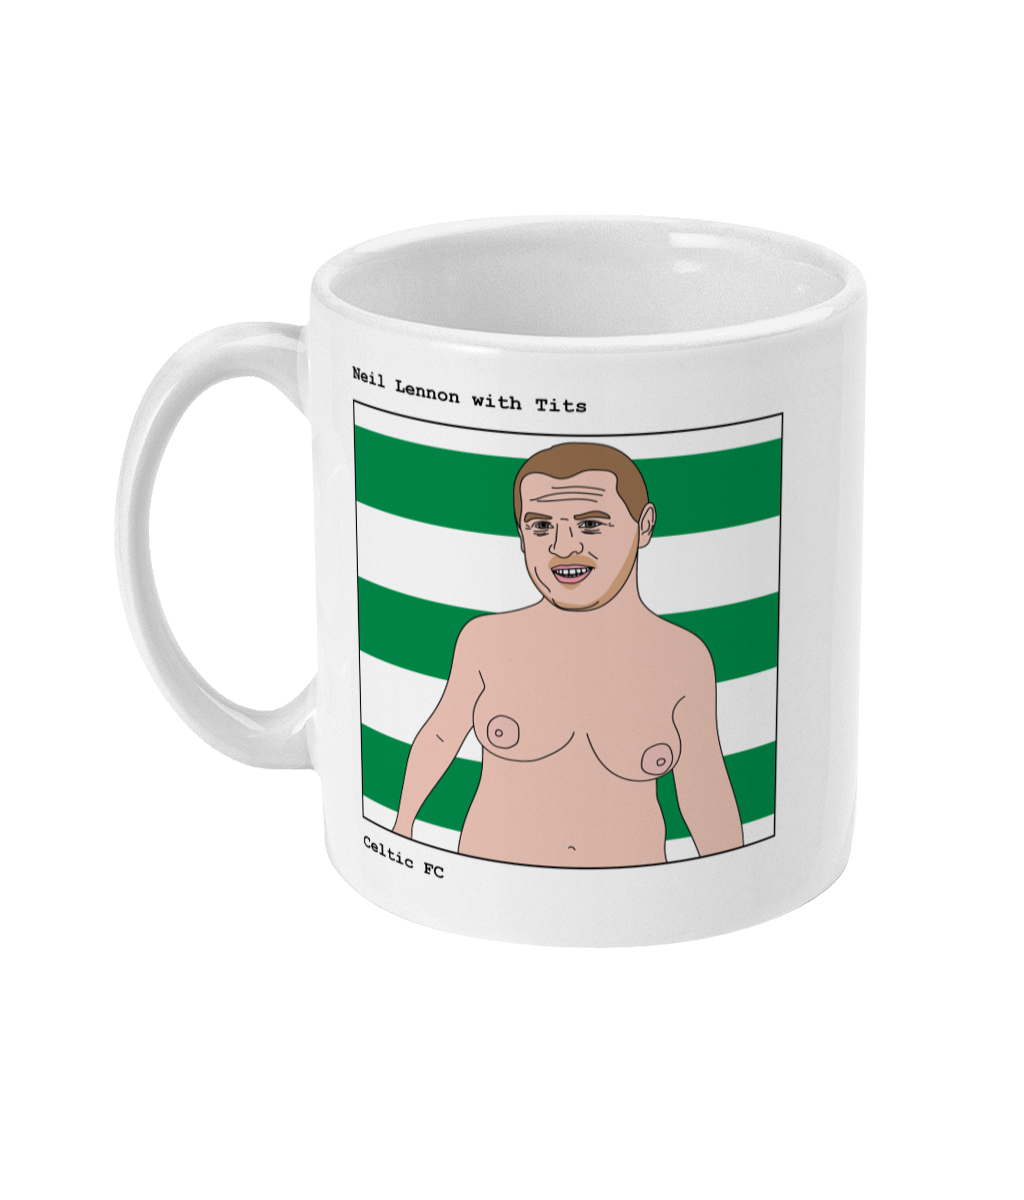 Neil Lennon with Tits - Footballers with Tits